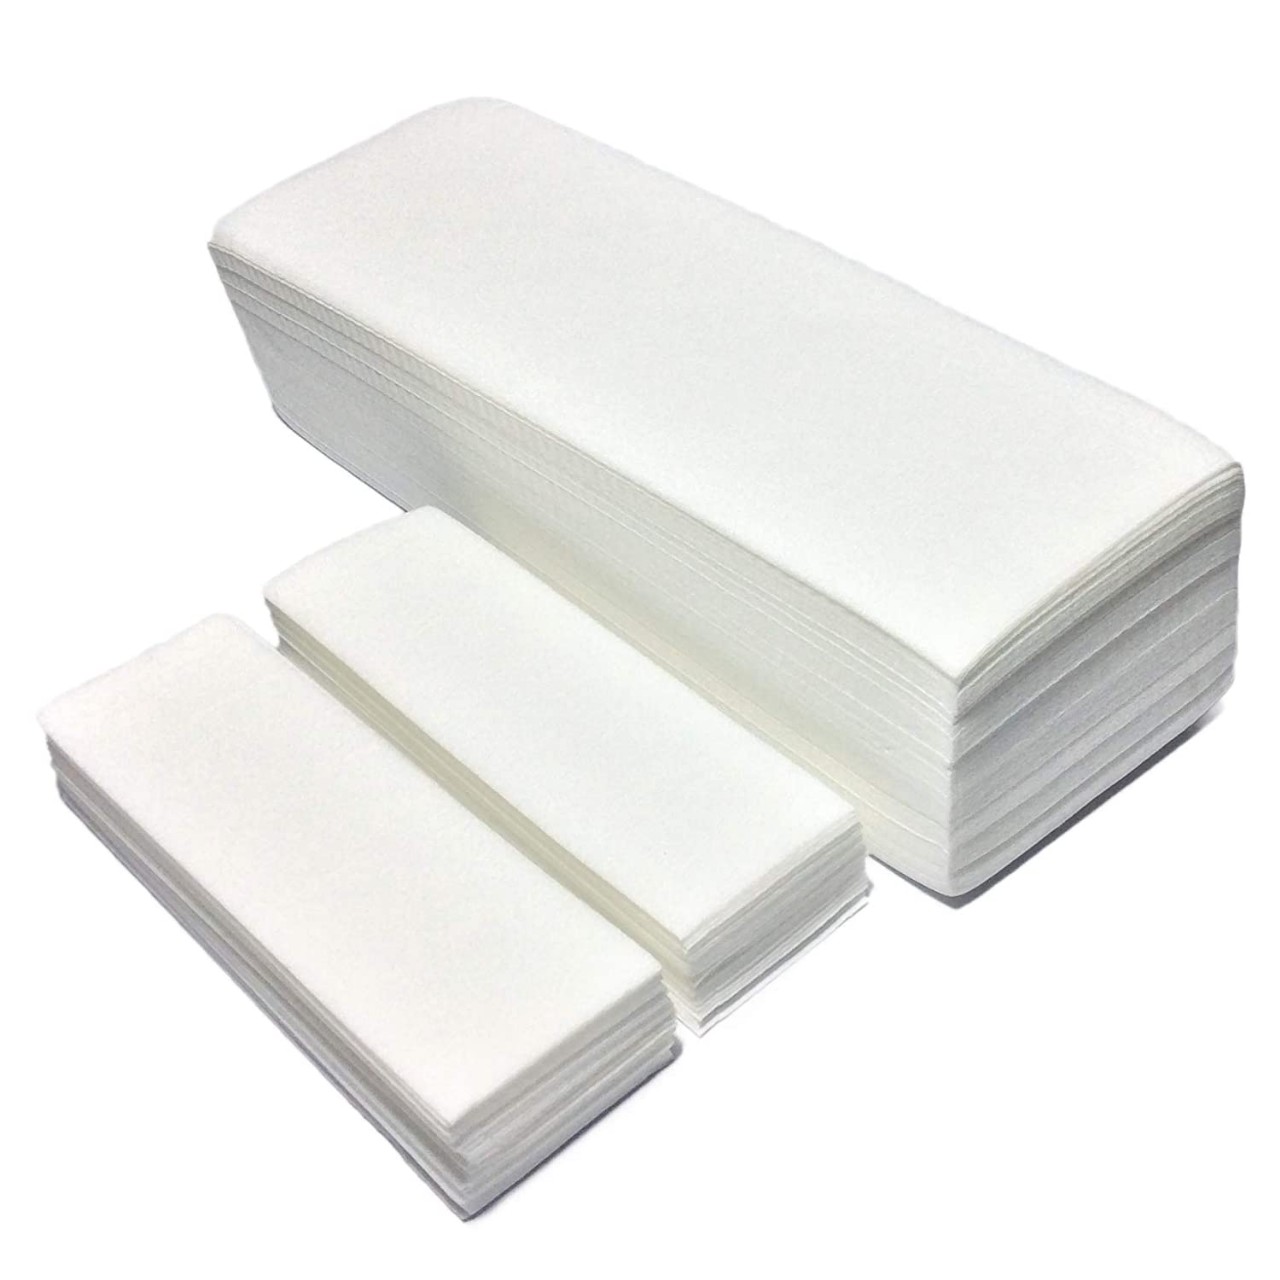 The Quality Non-Woven Wax Strips - Facial and Full Body Sizes Available, 200 Wax Strips (100 Small